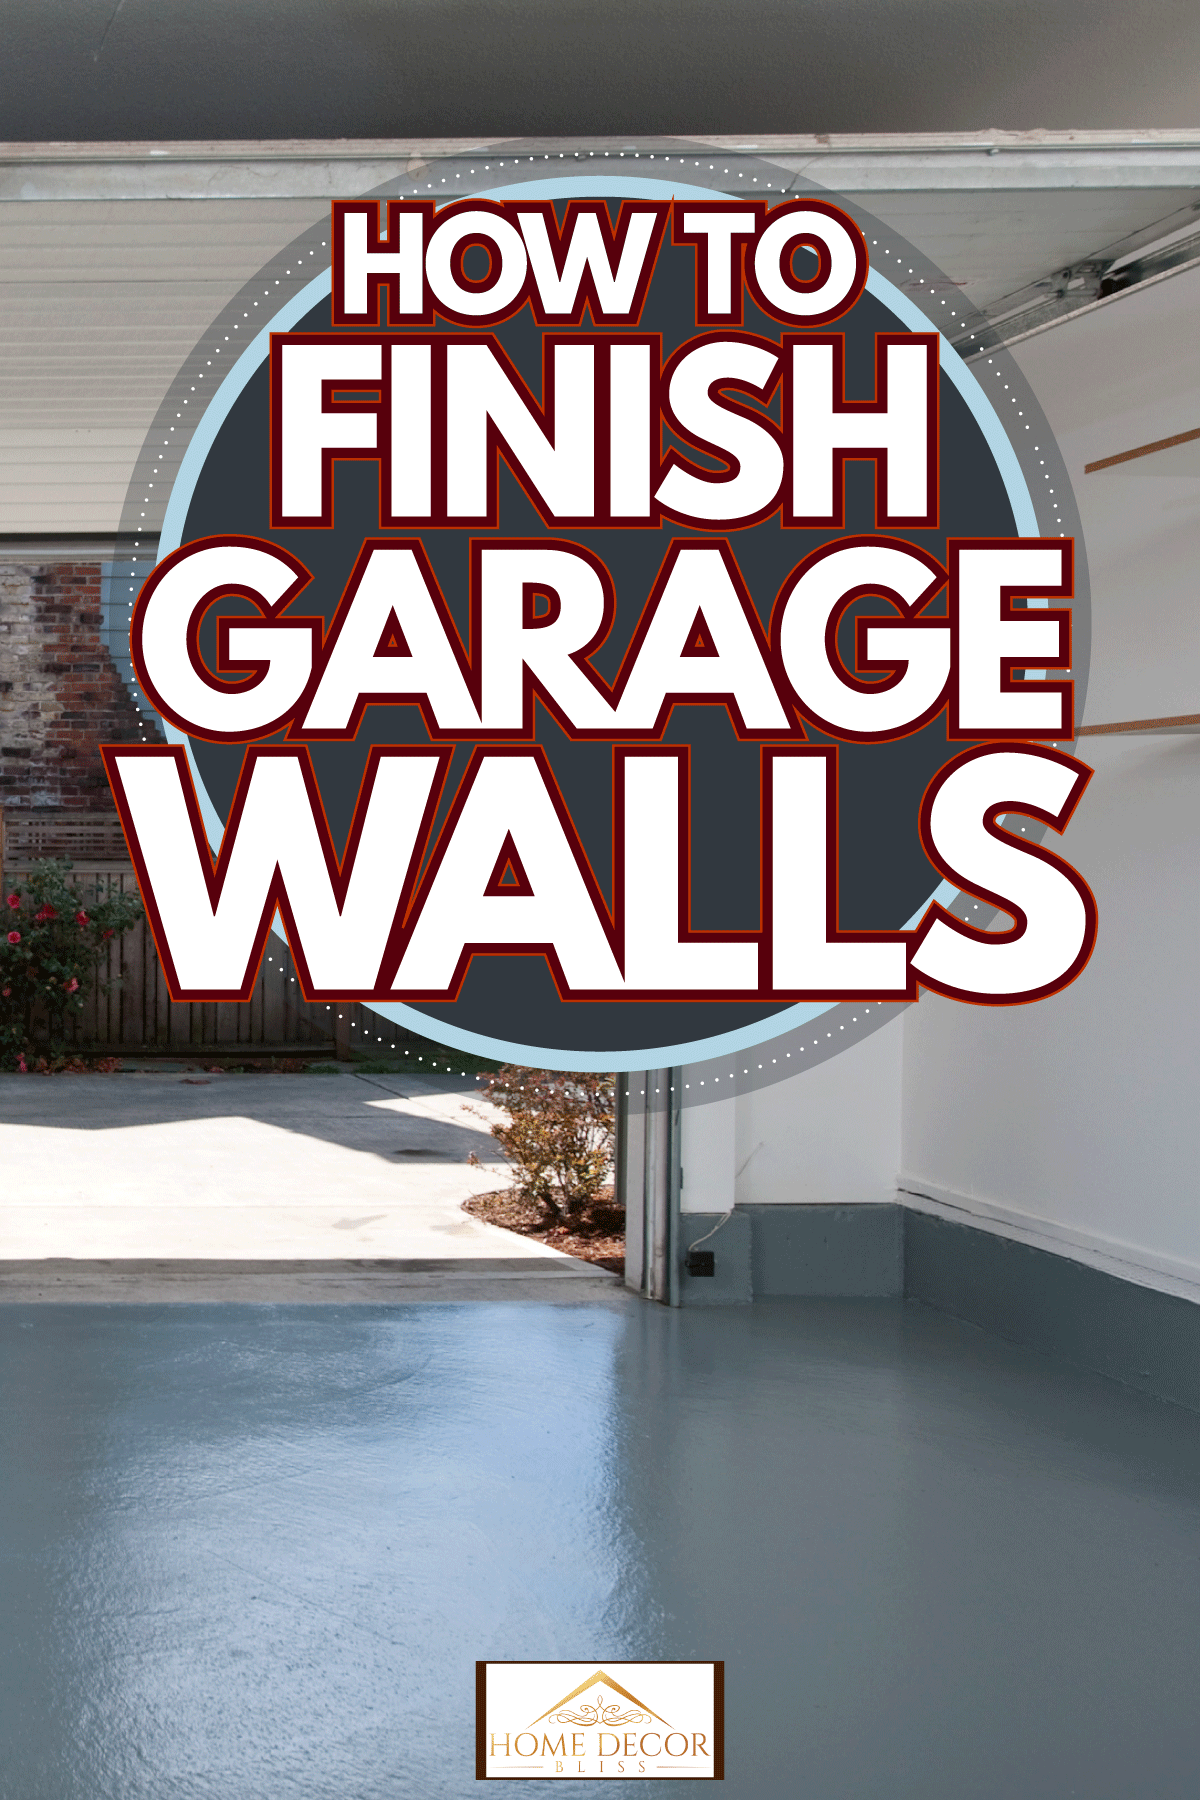 Finished Clearing the garage and it's walls, How to finish garage walls